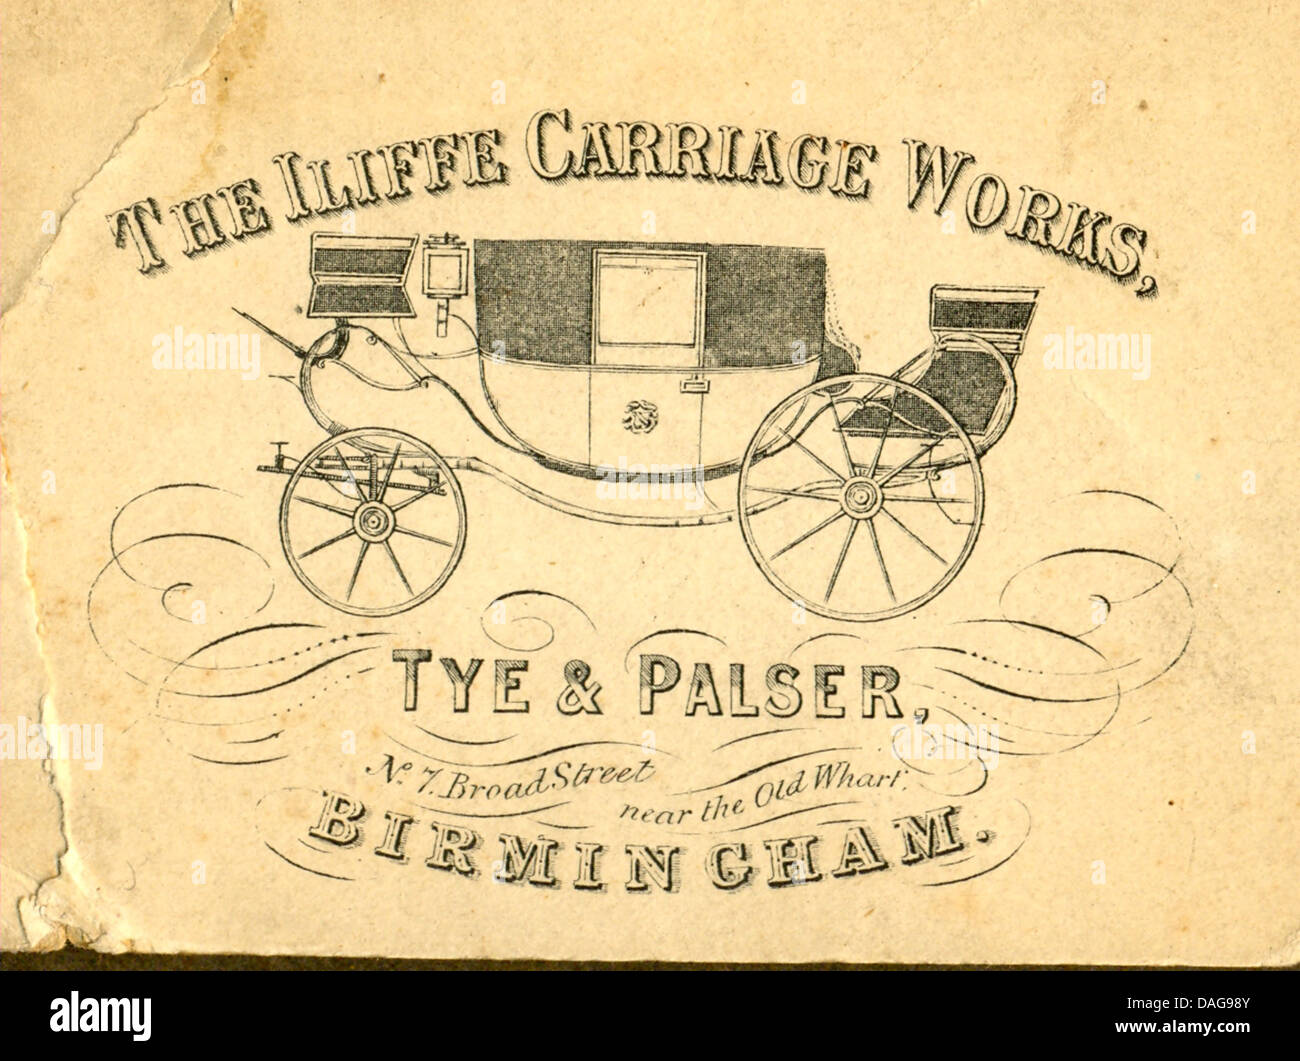 Trade card for The Iliffe Carriage Works of Tye & Palser Stock Photo